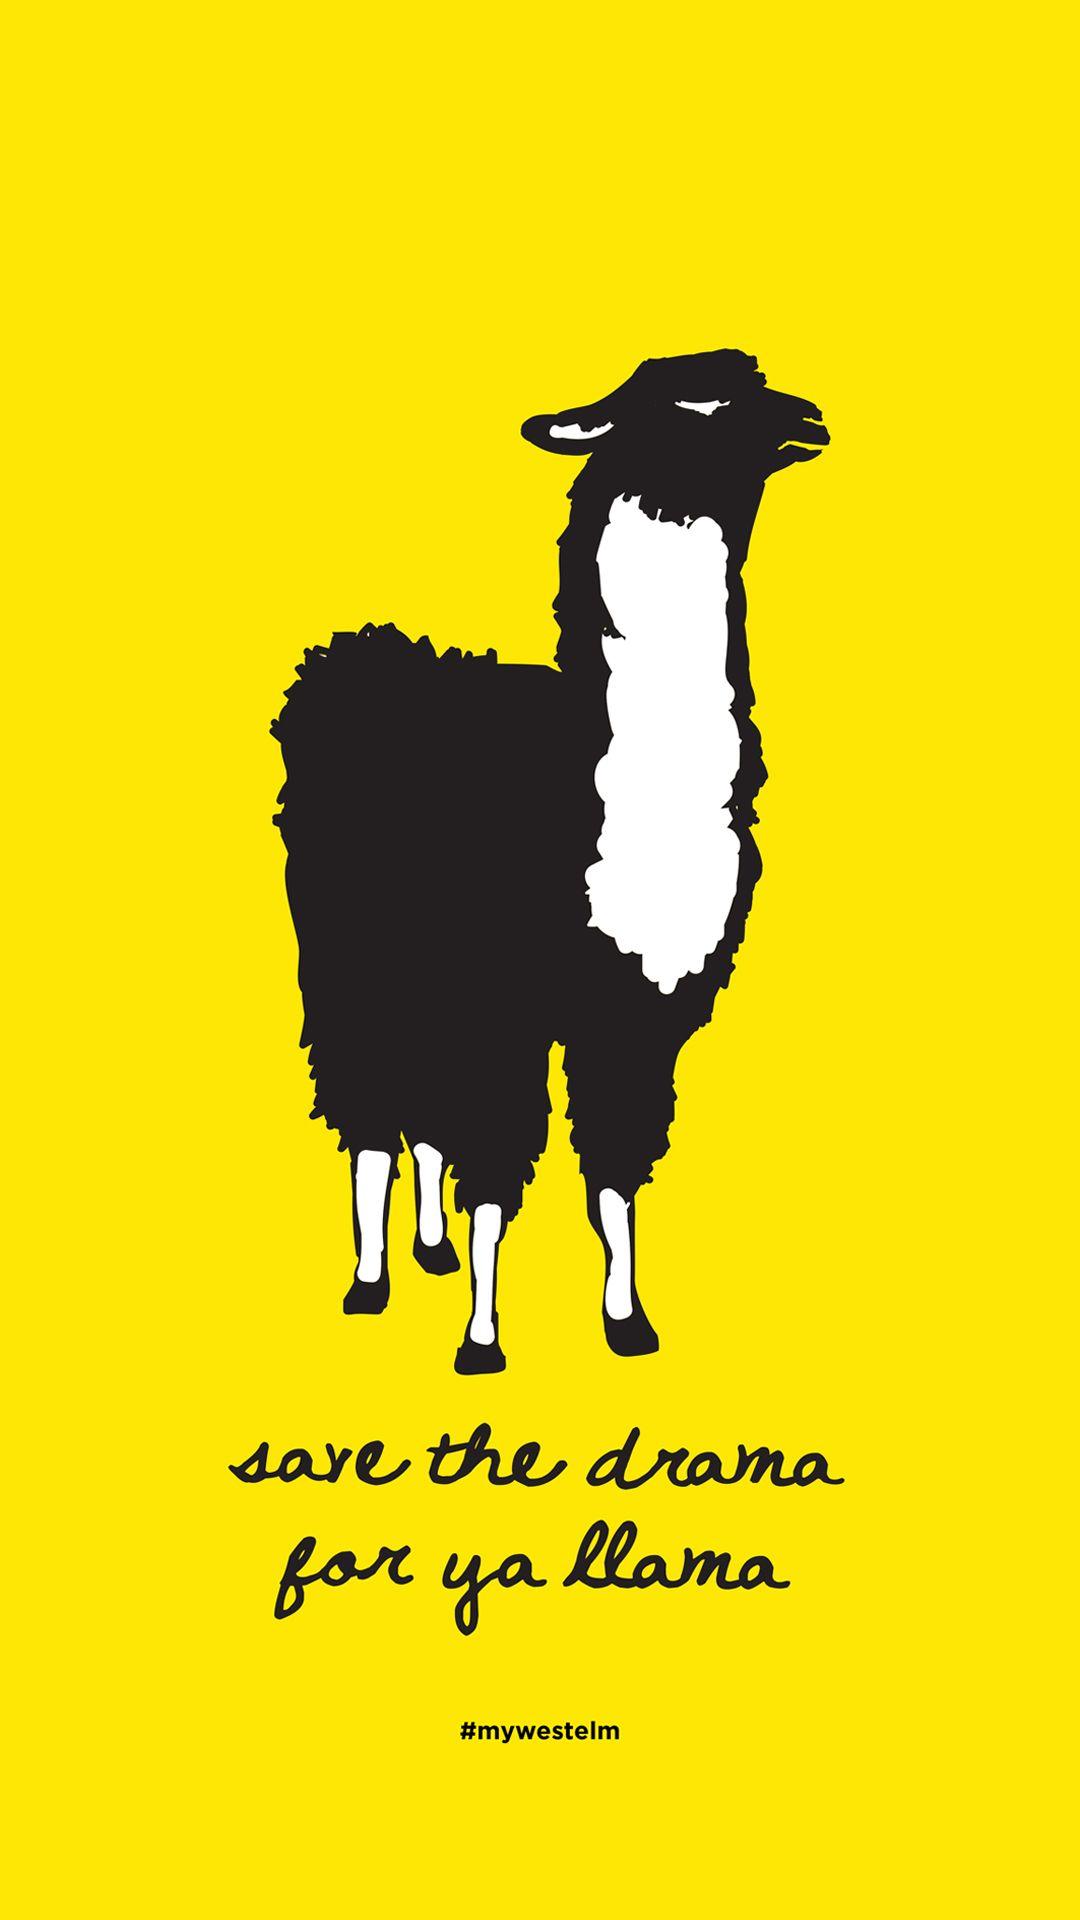 FREE DOWNLOAD: Save the Drama for your Llama Poster